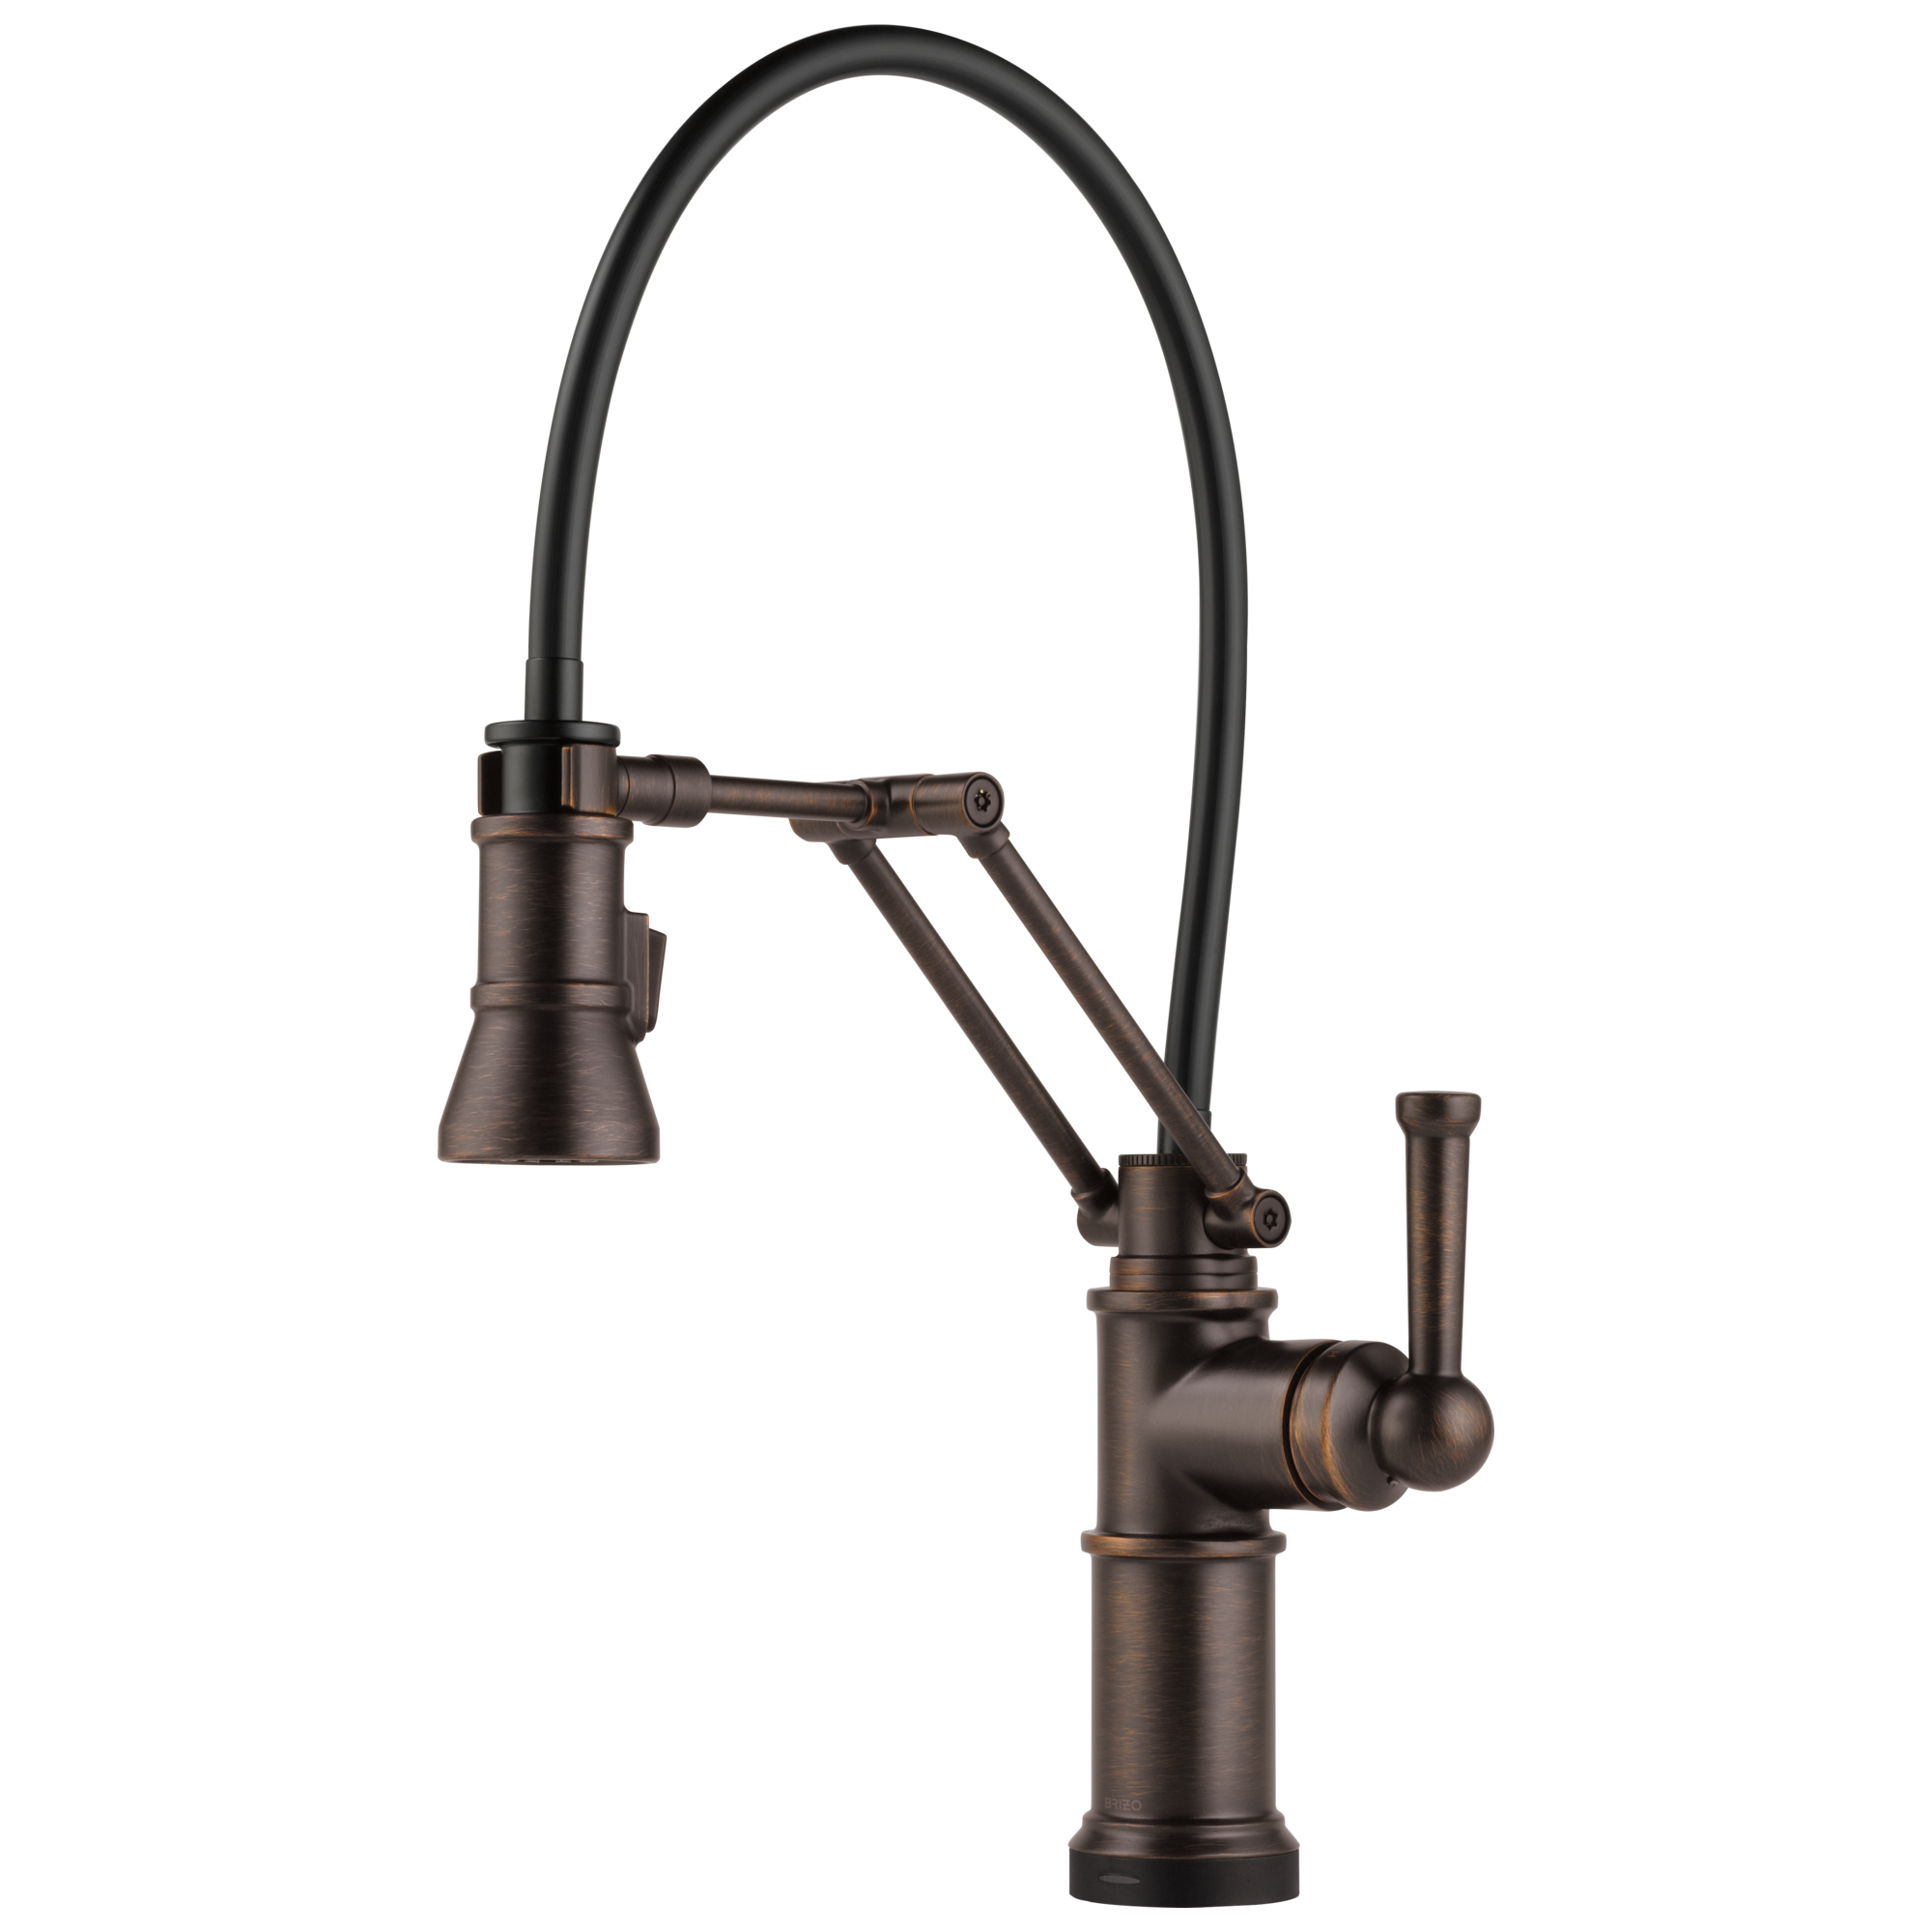 Brizo Artesso Single Handle Articulating Kitchen Kitchen Faucet with Smart Touch Technology